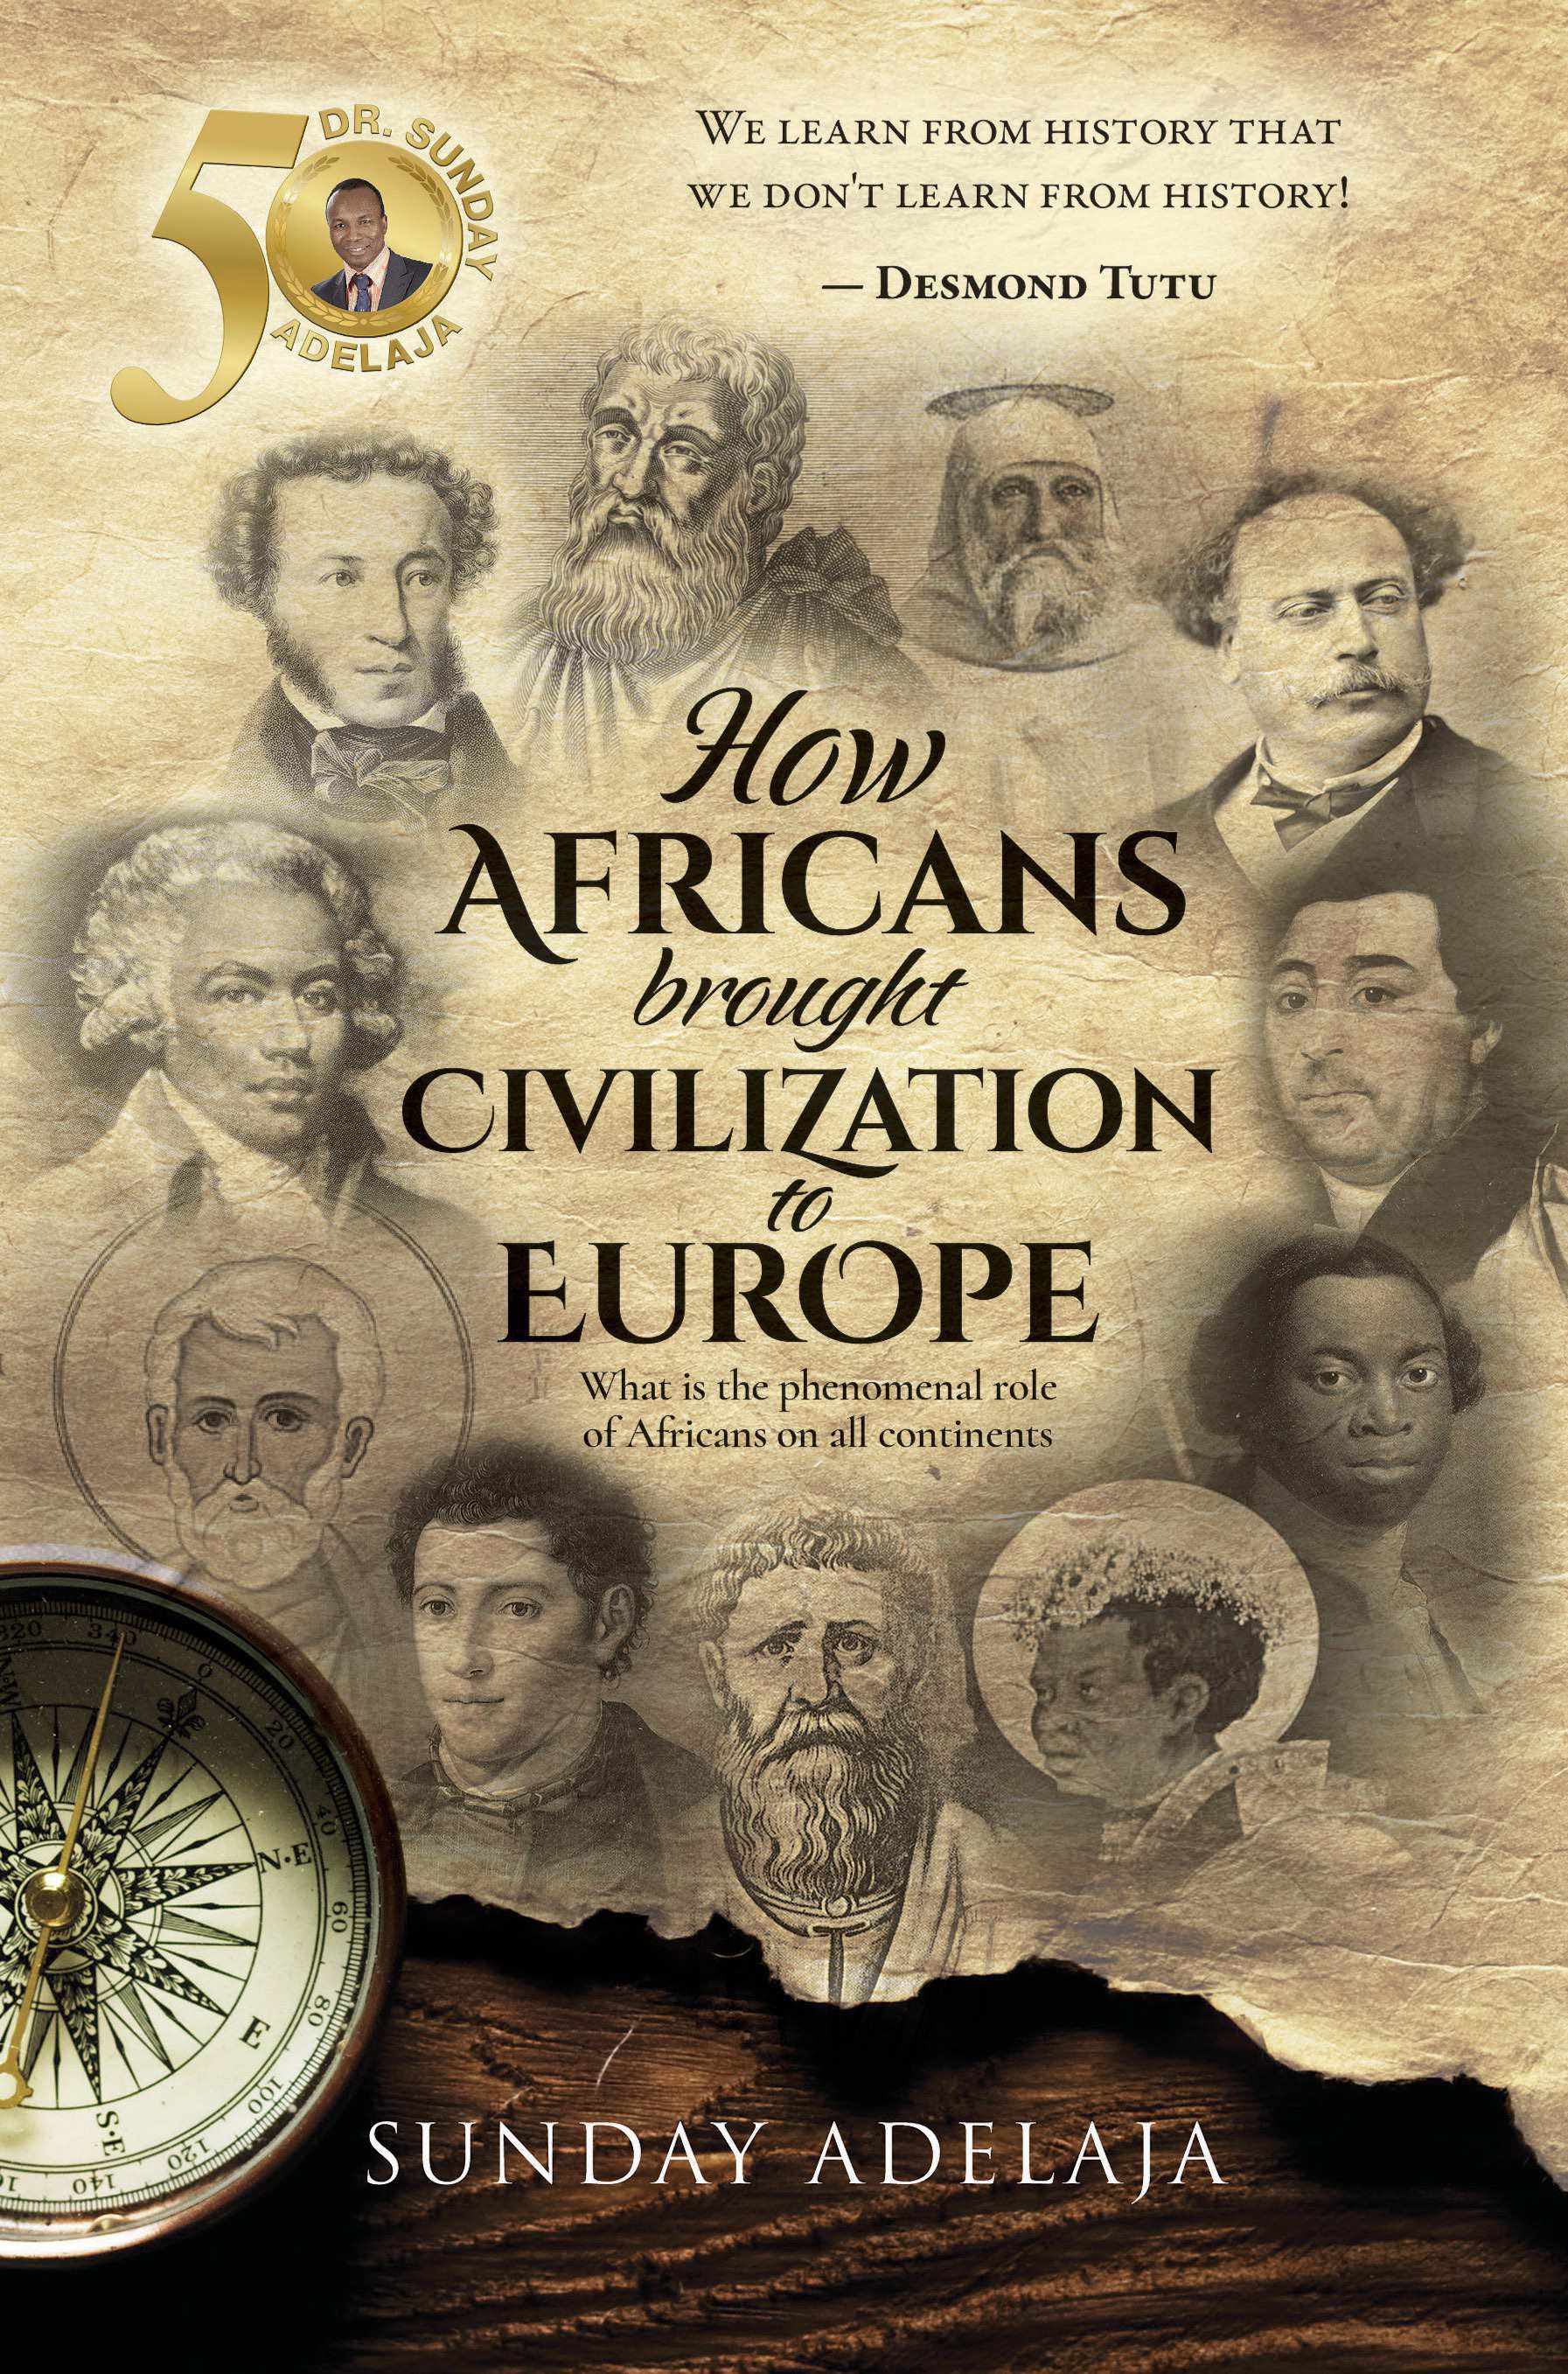 How-Africans-brought-civilization-to-Europe--Discover-the-phenomenal-role-of-Africans-on-all-continents